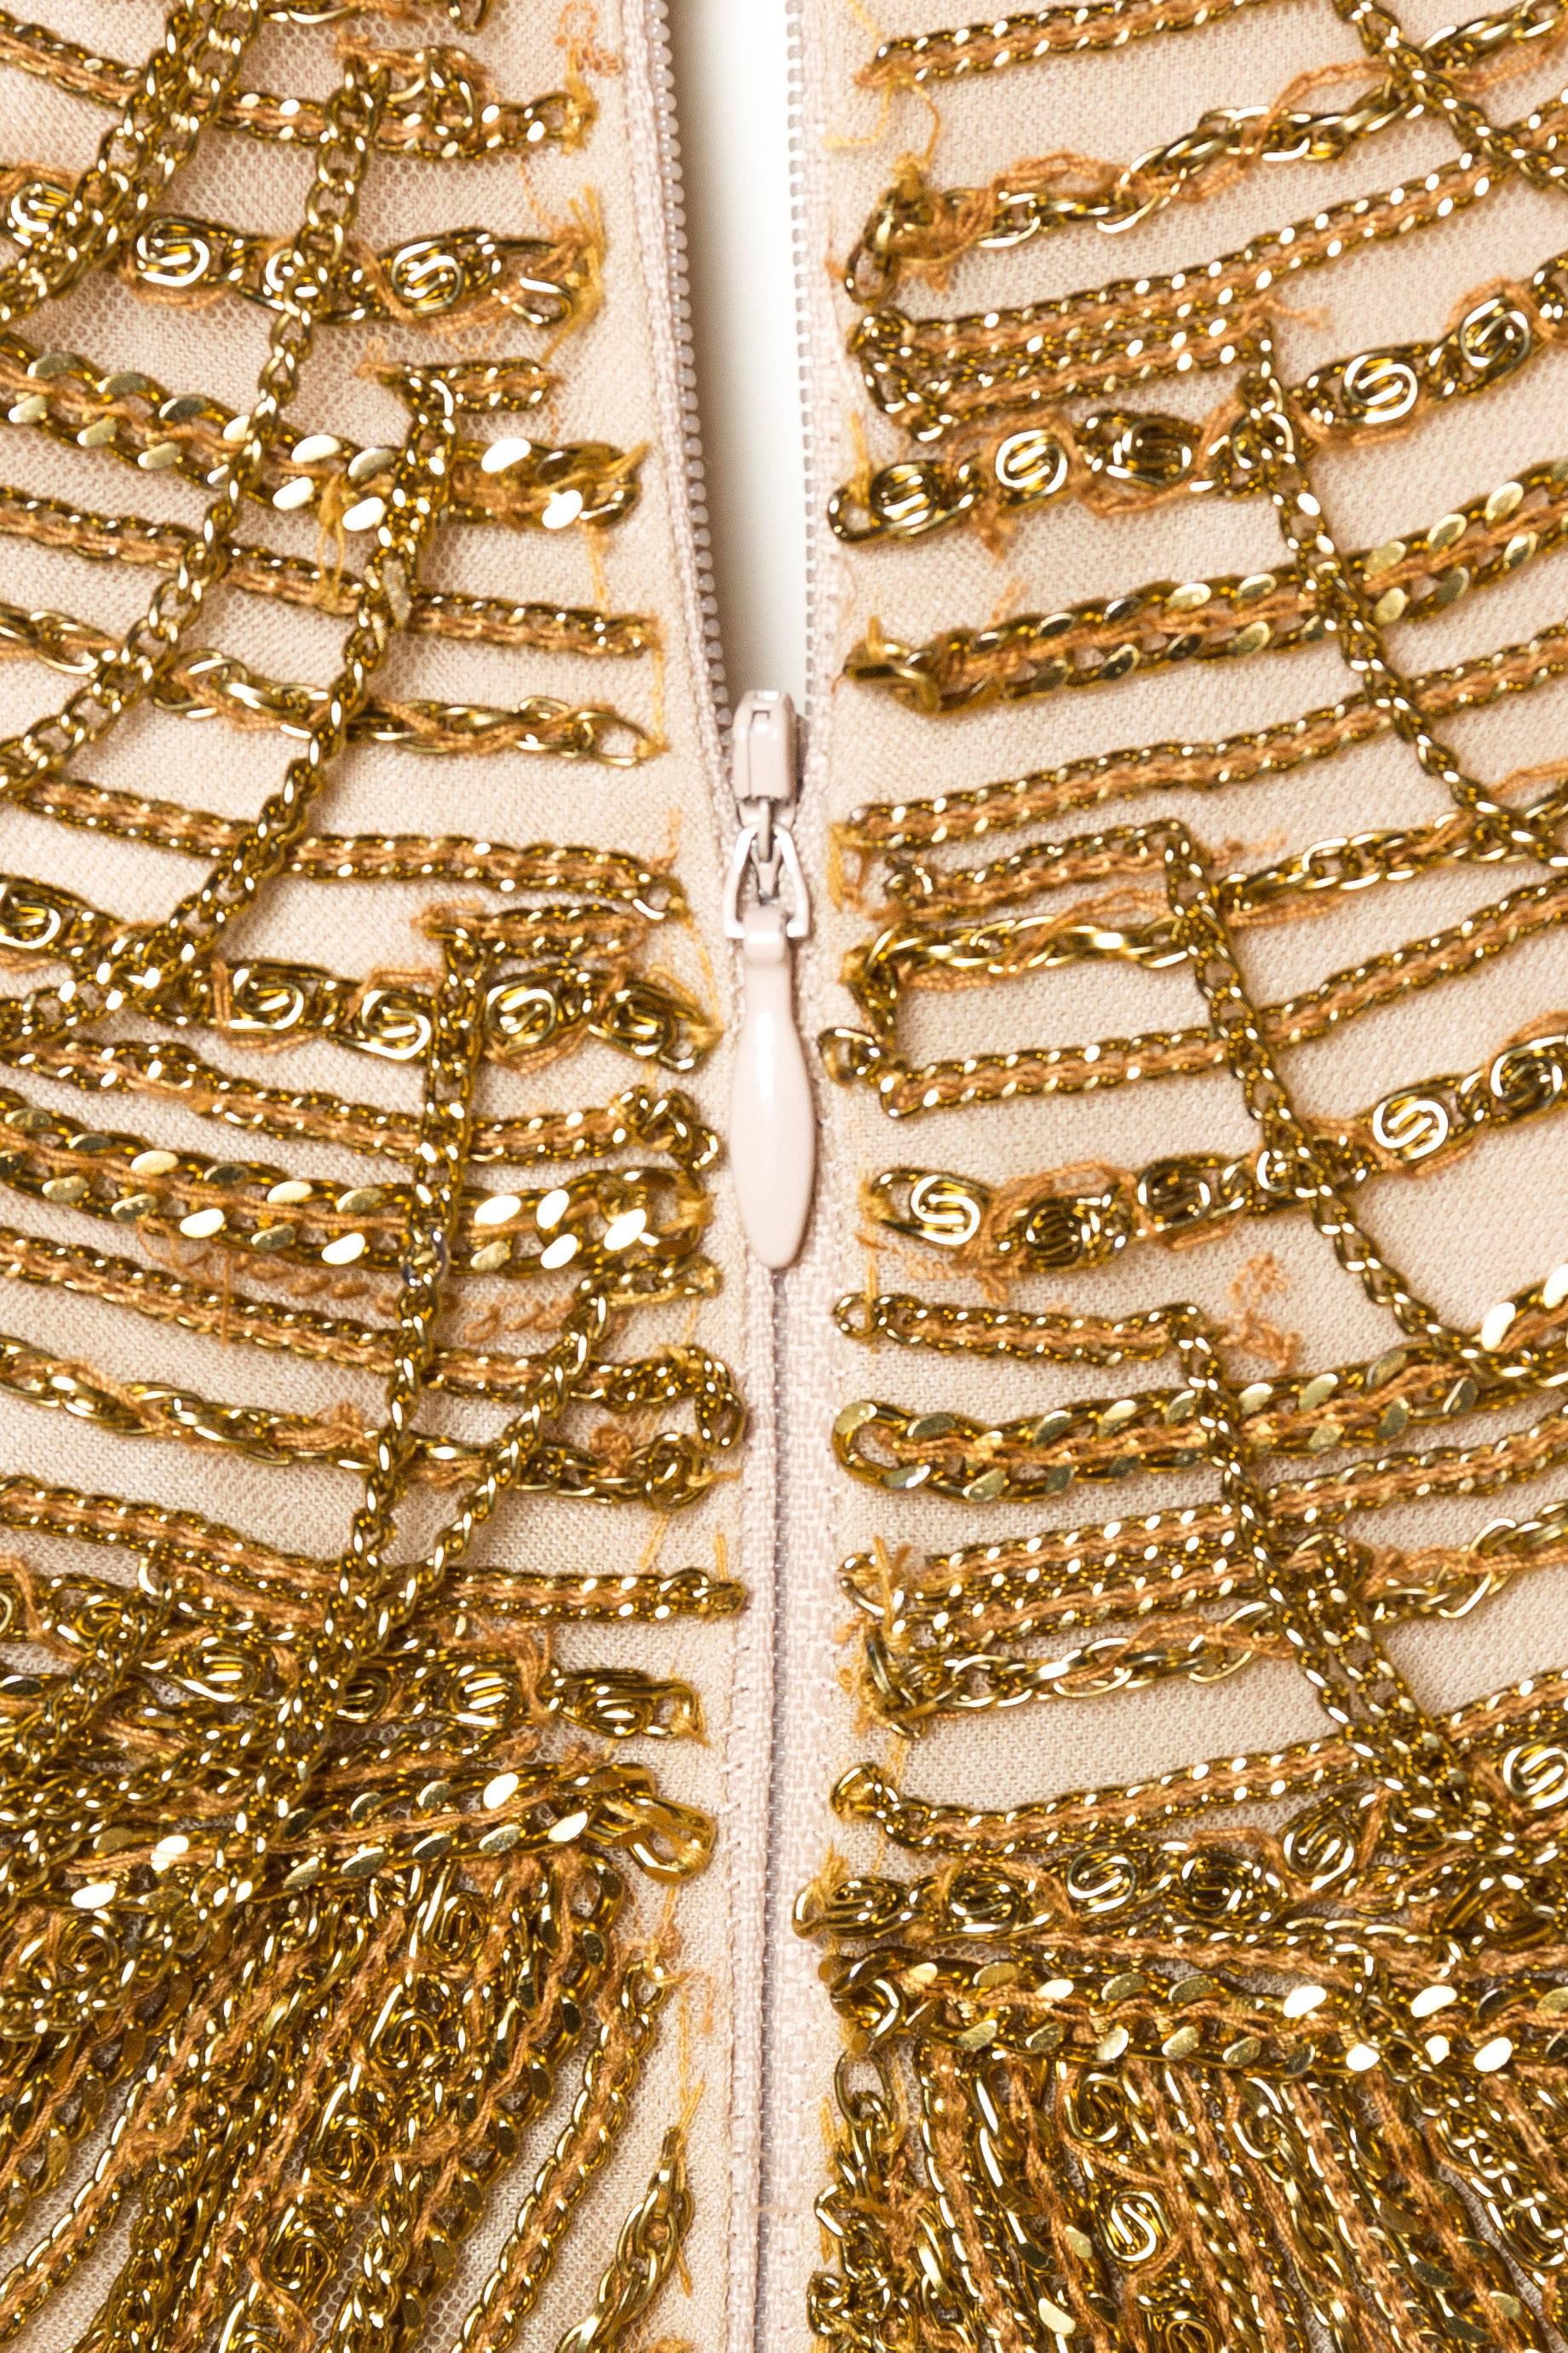 Naeem Khan Nude Dress Dripping in Gold Chains For Sale 1